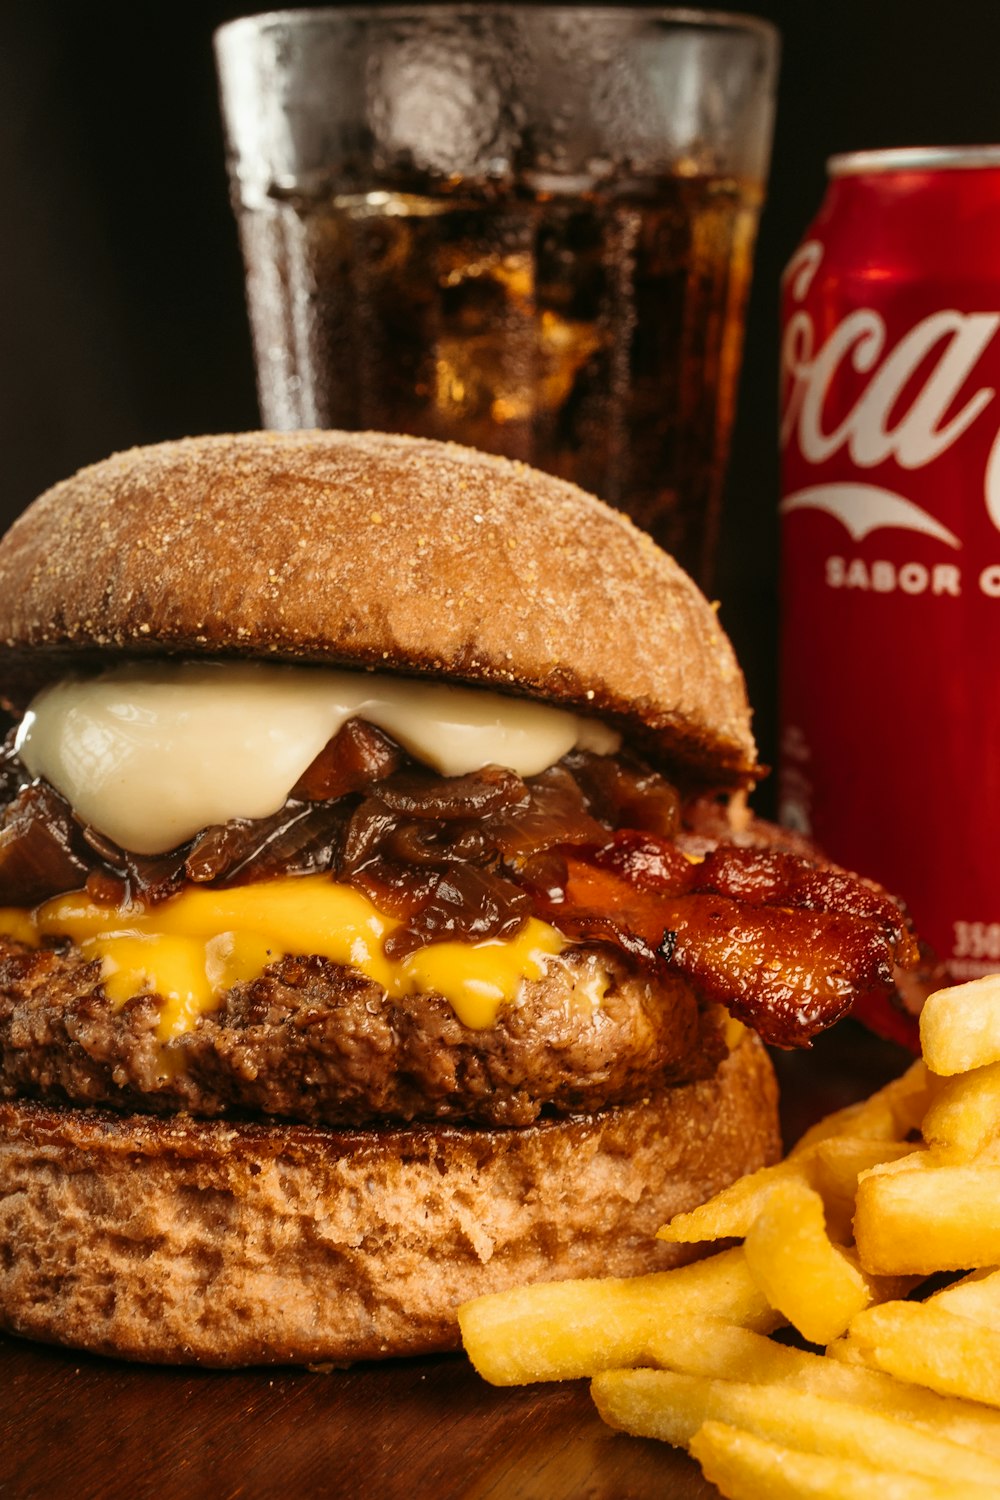 a bacon cheeseburger with fries and a coke